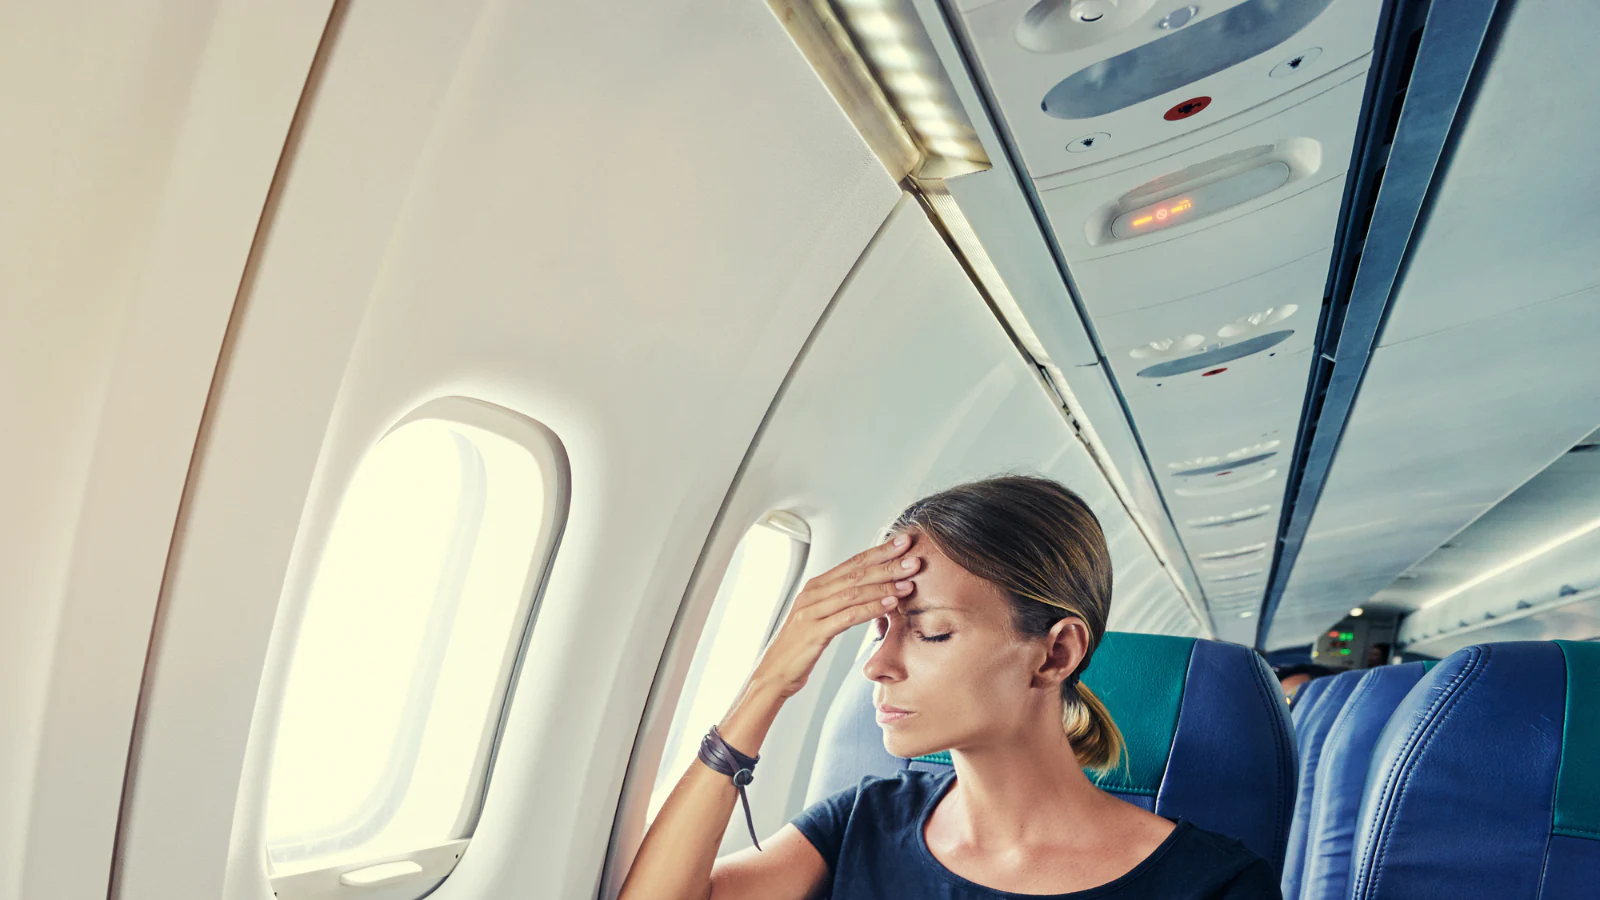 Simple exercises for long-haul flights to keep you relaxed